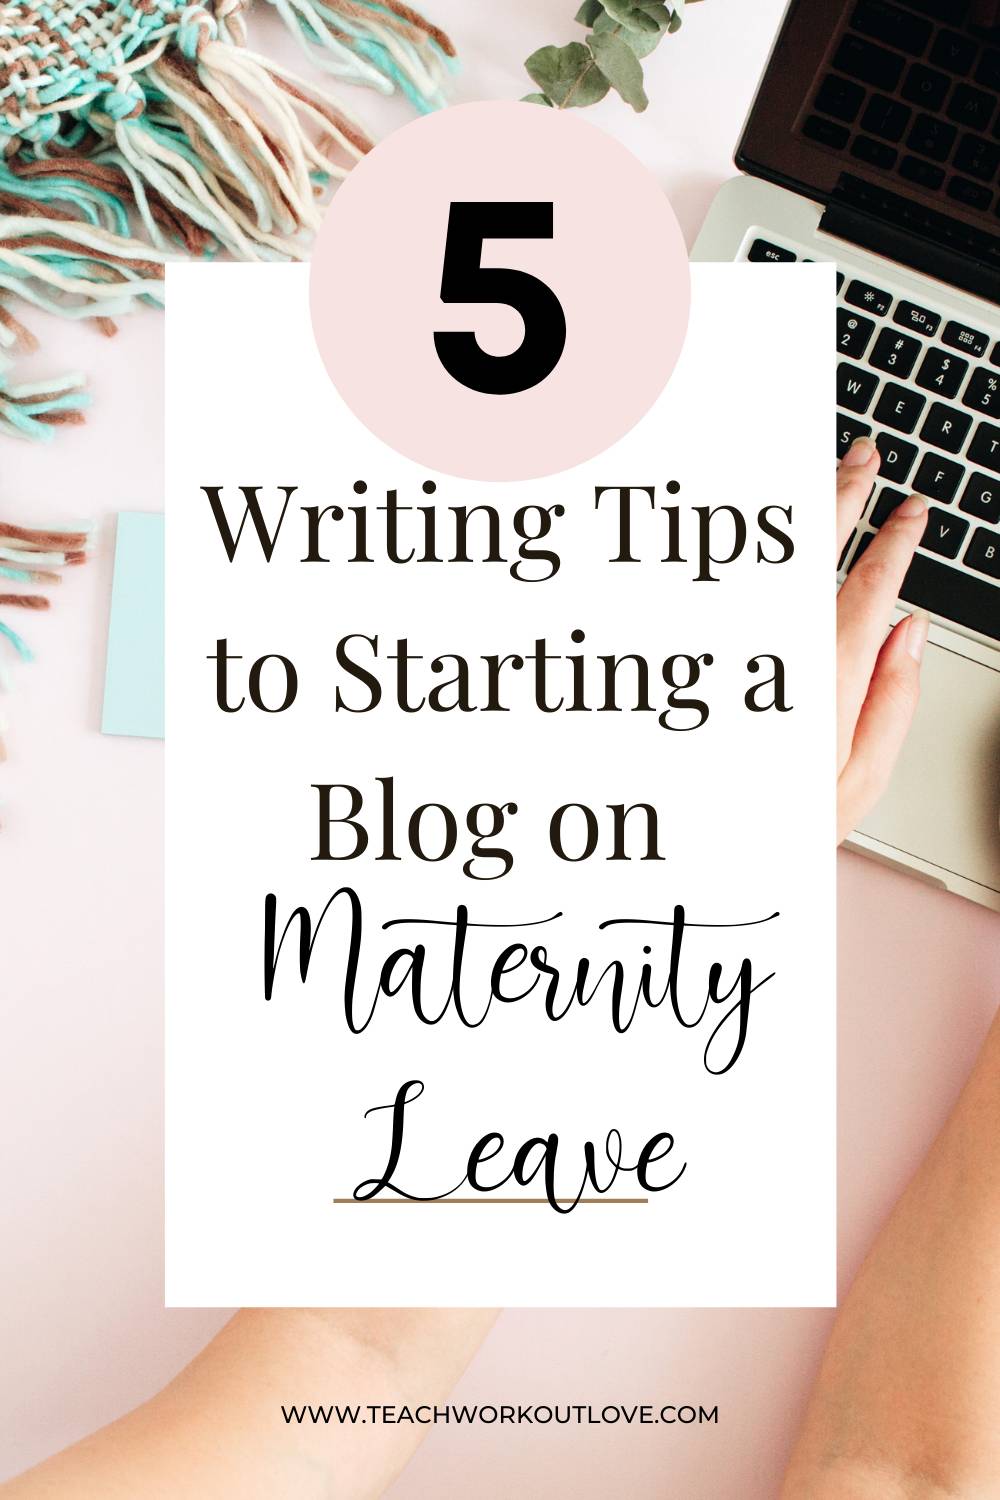 Before starting a blog on maternity leave, you should know some writing insights. Here's writing tips any blogging mommy might want to hear.